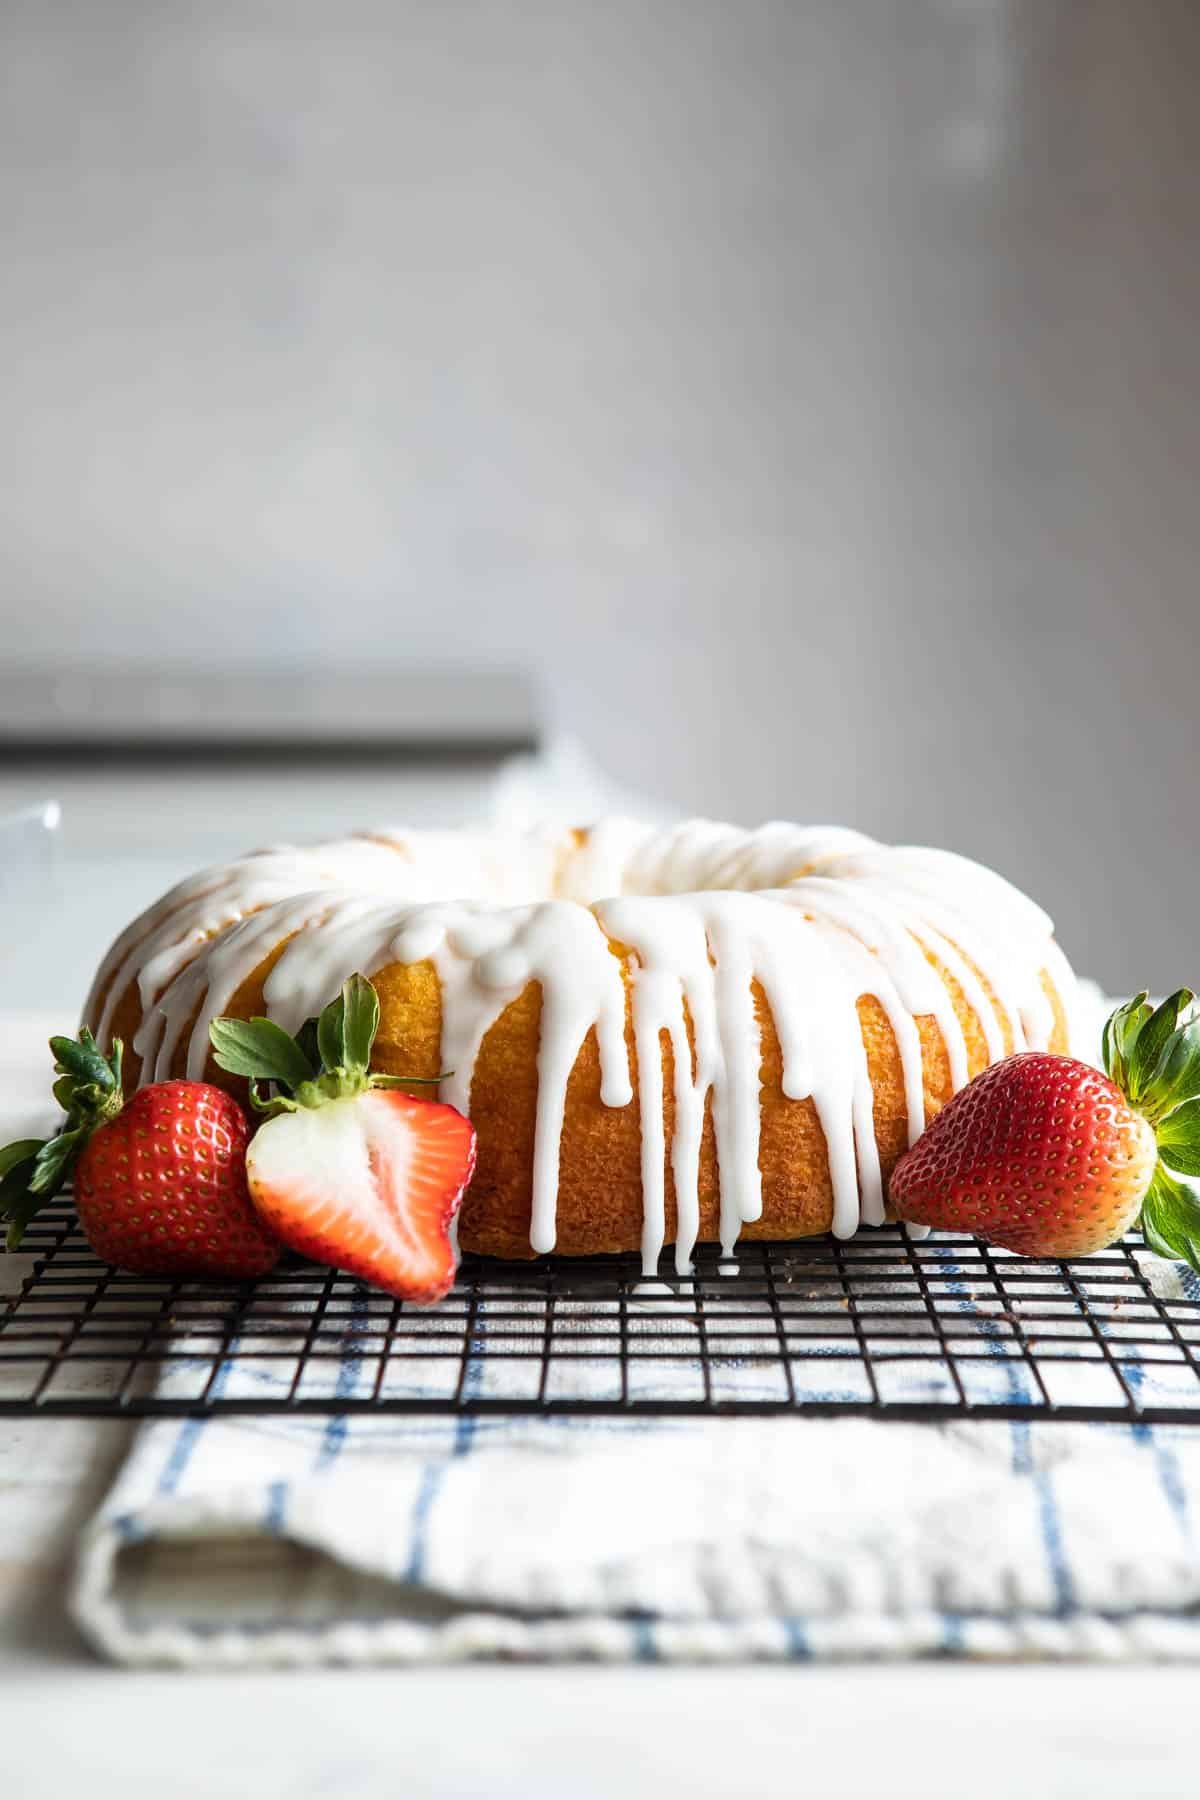 An unsliced lemon bundt cake with lots of glaze and some strawberries nearby.